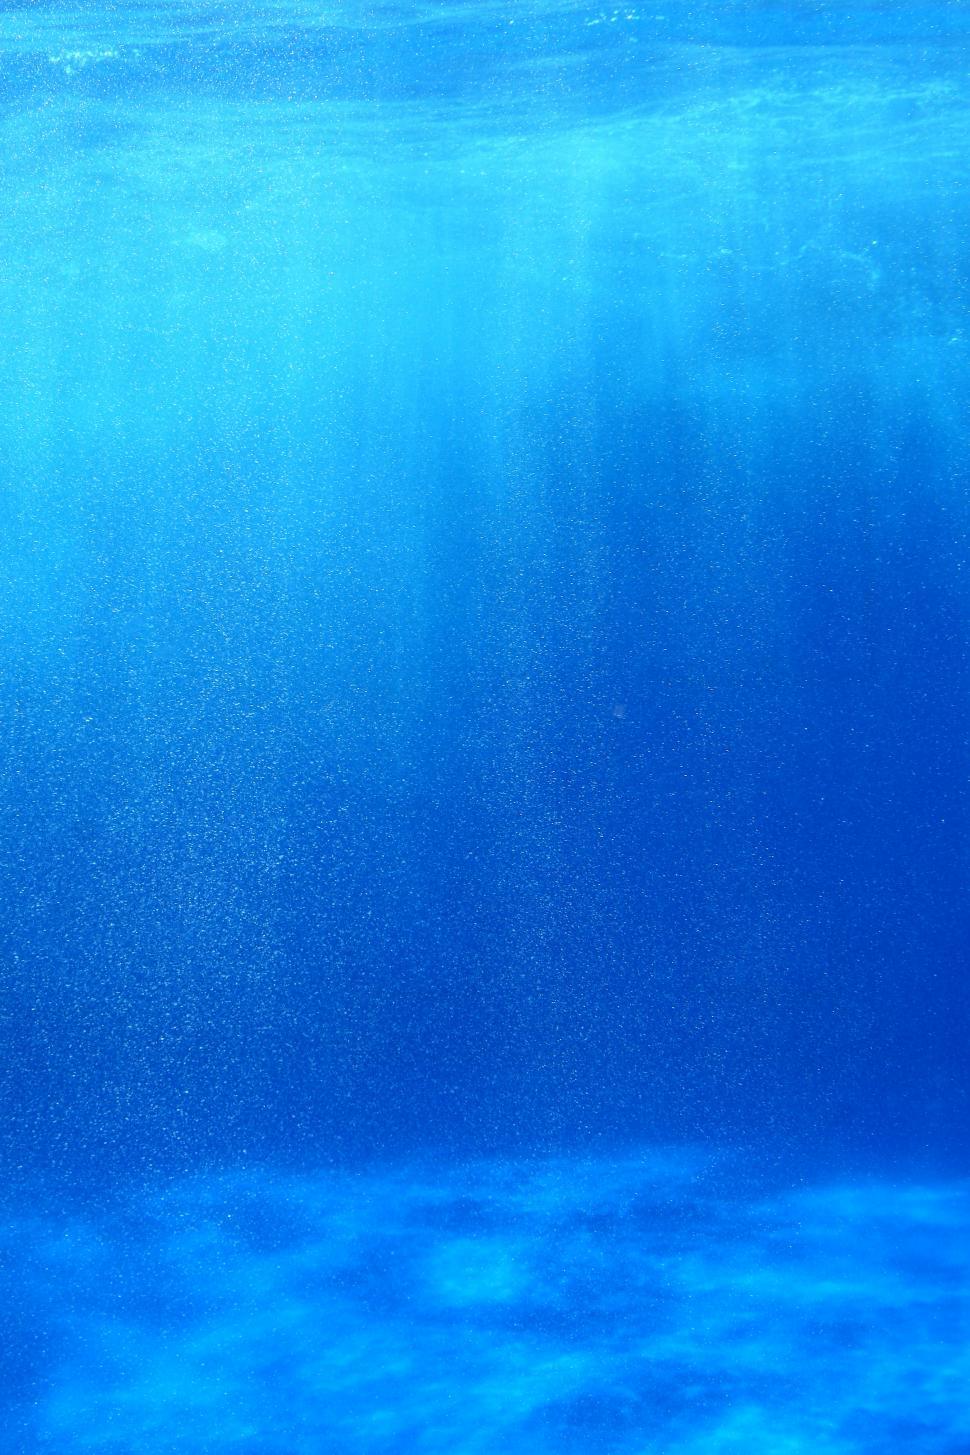 Download Free Stock Photo of Penetrating light through the blue water 